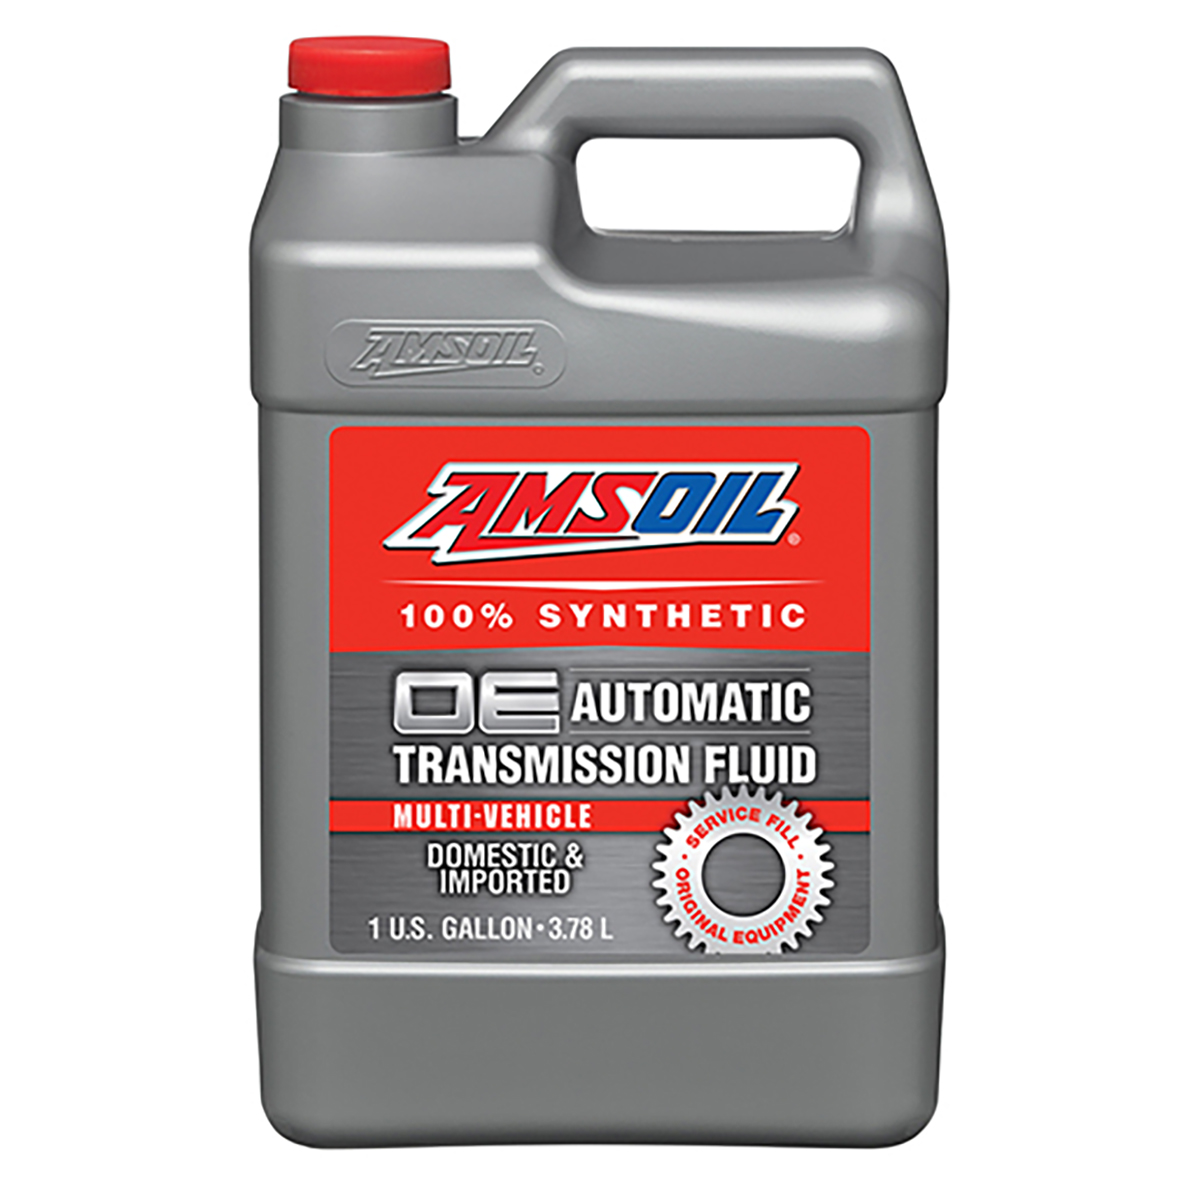 OE Multi-Vehicle Synthetic Automatic Transmission Fluid, 1G